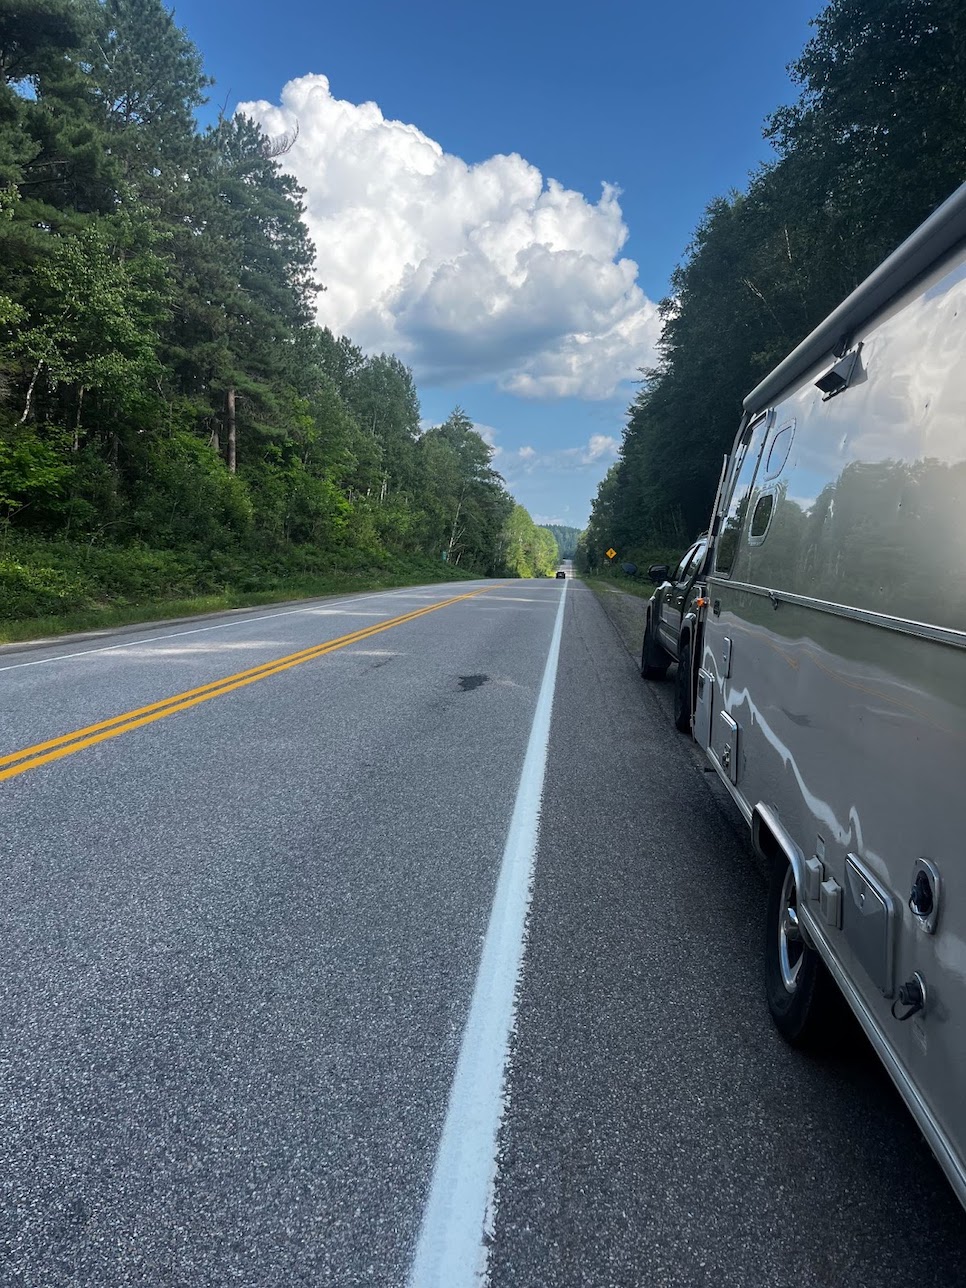 a low shot of the side of a shiny Airstream trailer rolling along an empty highway, which stretches out into the distance. There are walls of green forest on both sides and a bright blue sky overhead.